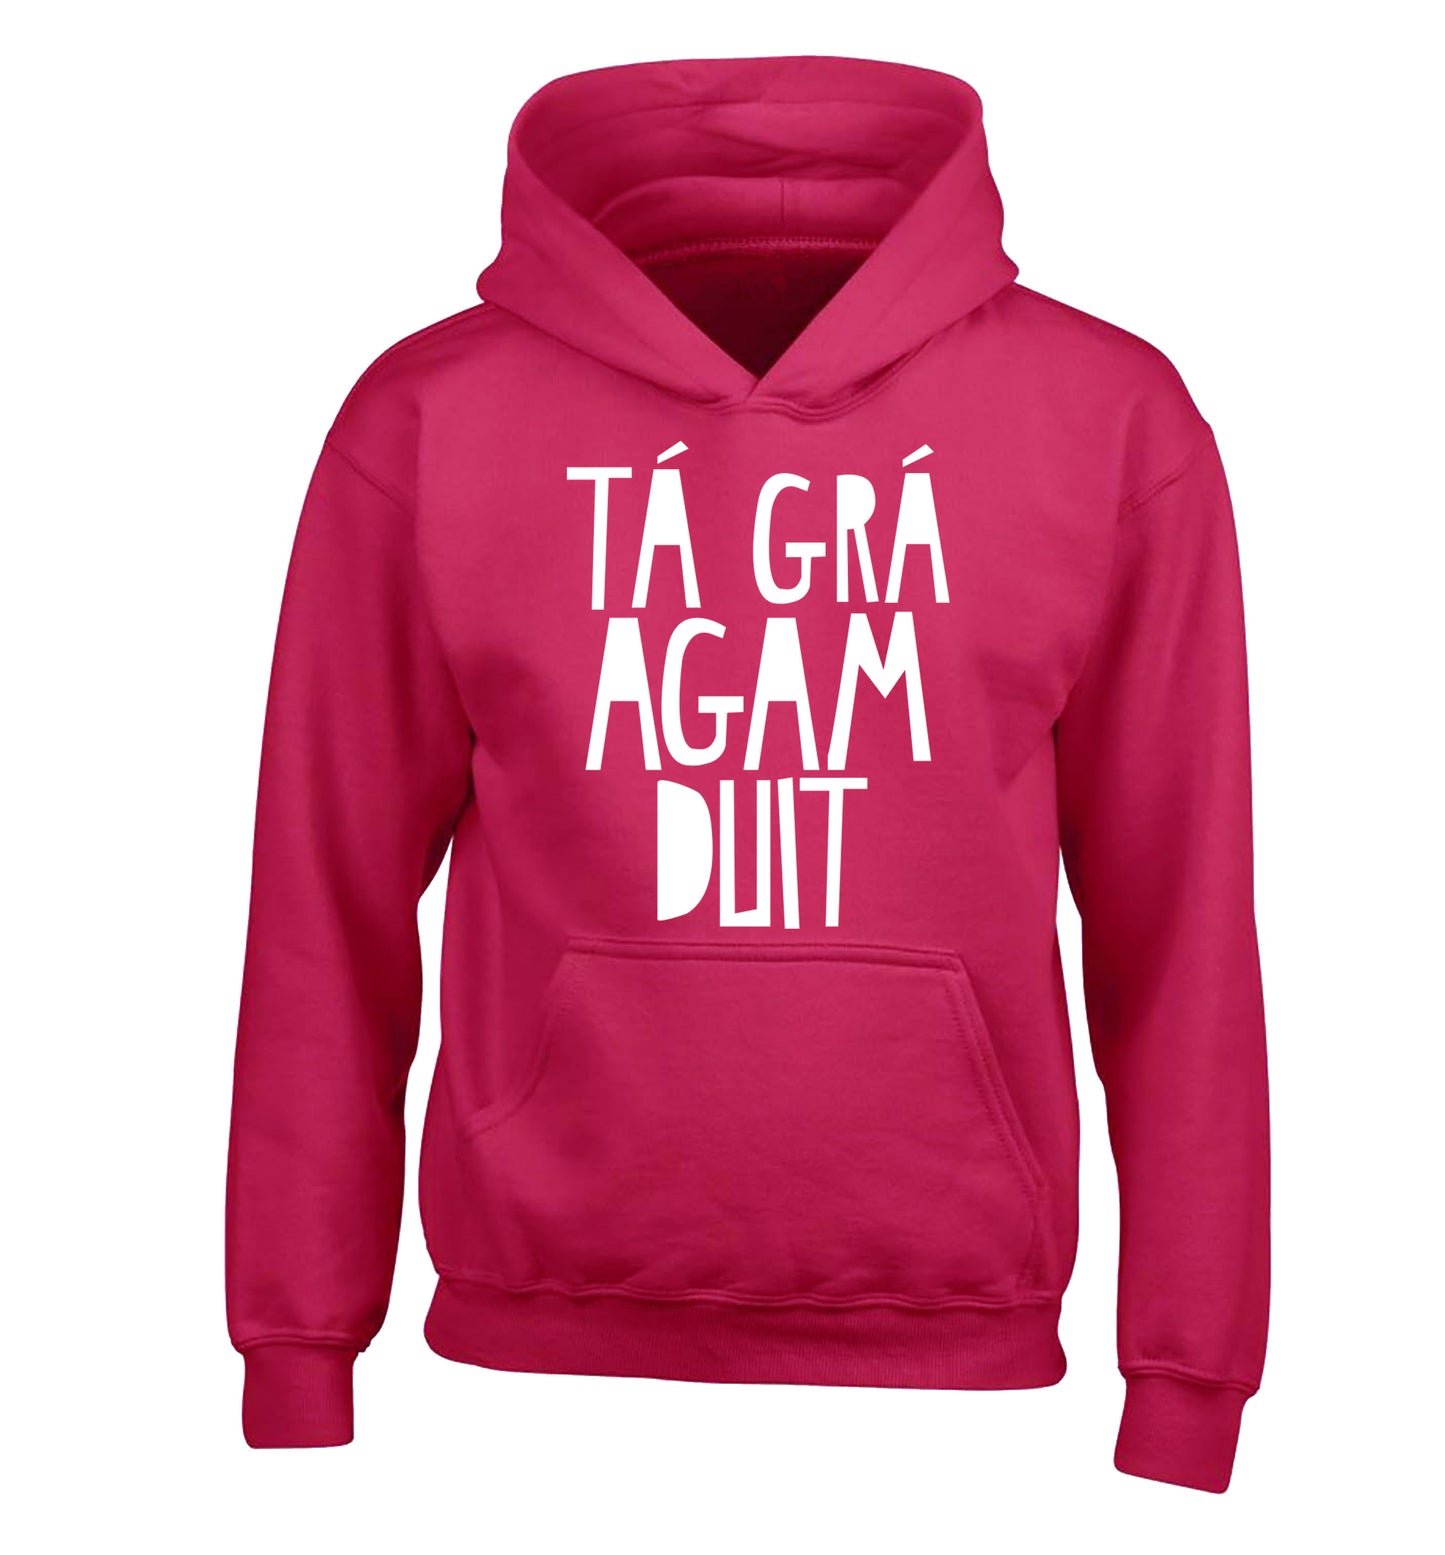 T‚Ä° gr‚Ä° agam duit - I love you children's pink hoodie 12-13 Years